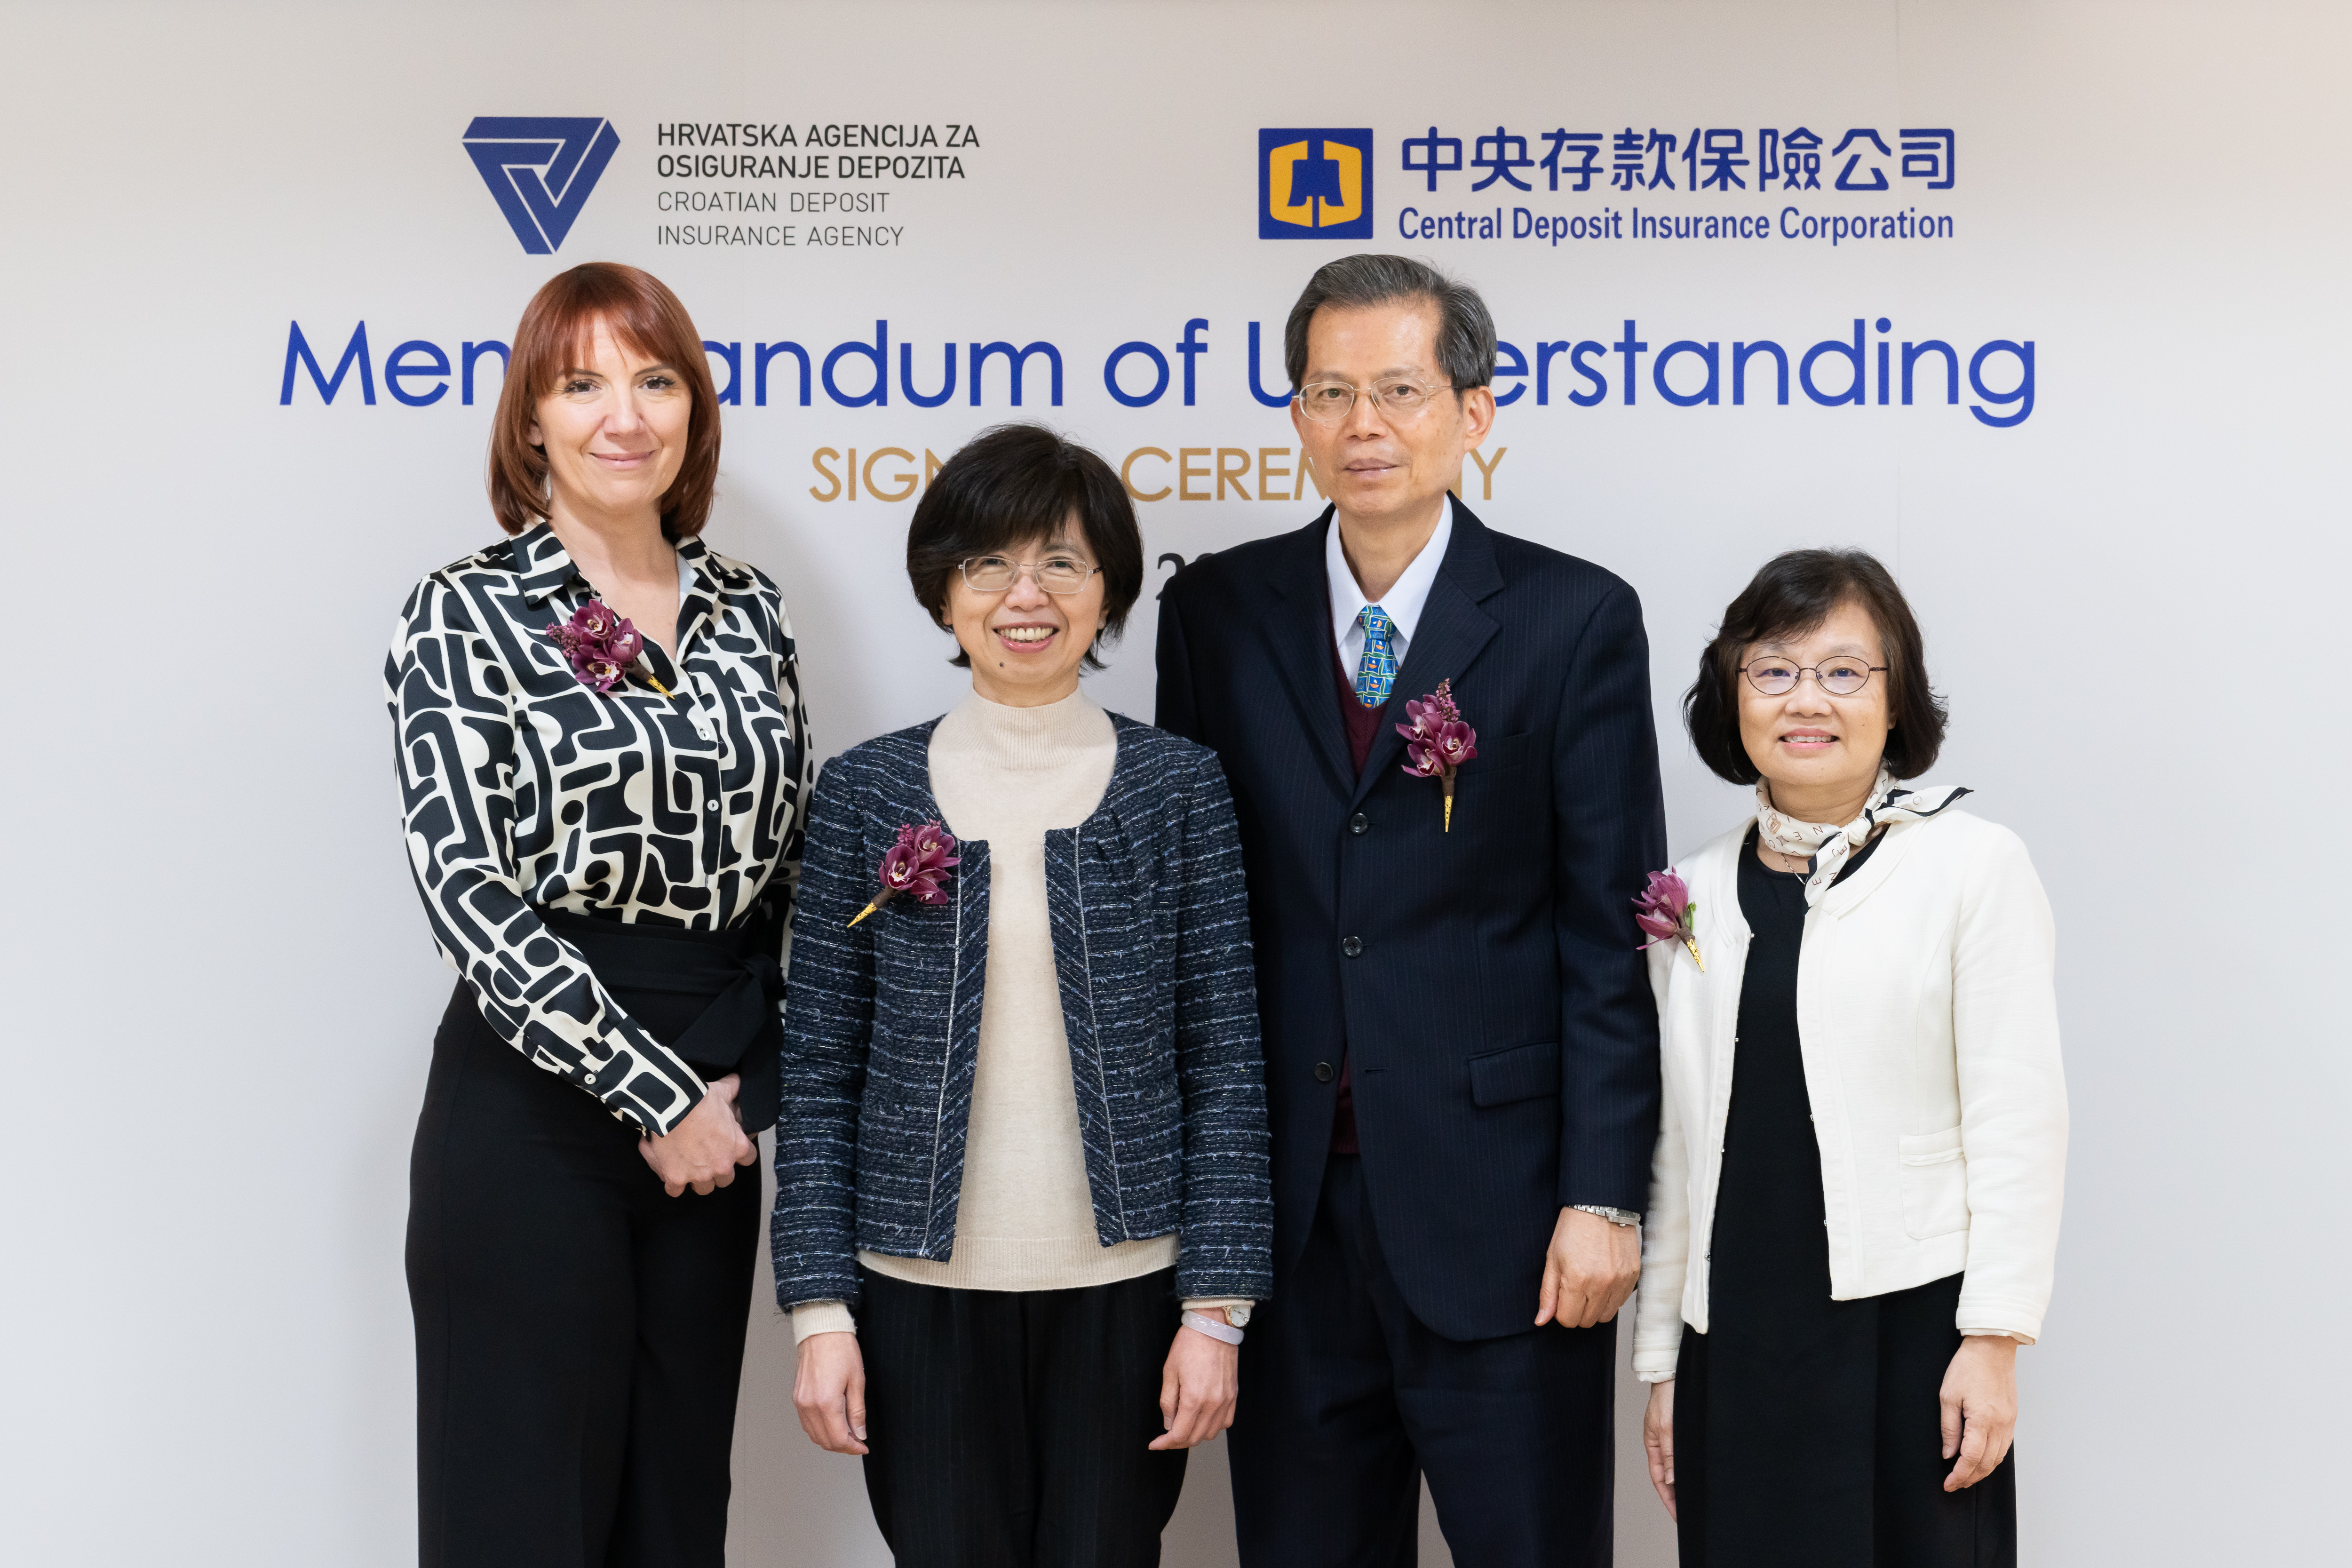 Group photo of Banking Bureau of Financial Supervisory Commission Director-General Hsou Yuan Chuang, CDIC Chairman William Su, CDIC President Annie Cheng, and CDIA CEO Ms. Marija Hrebac.